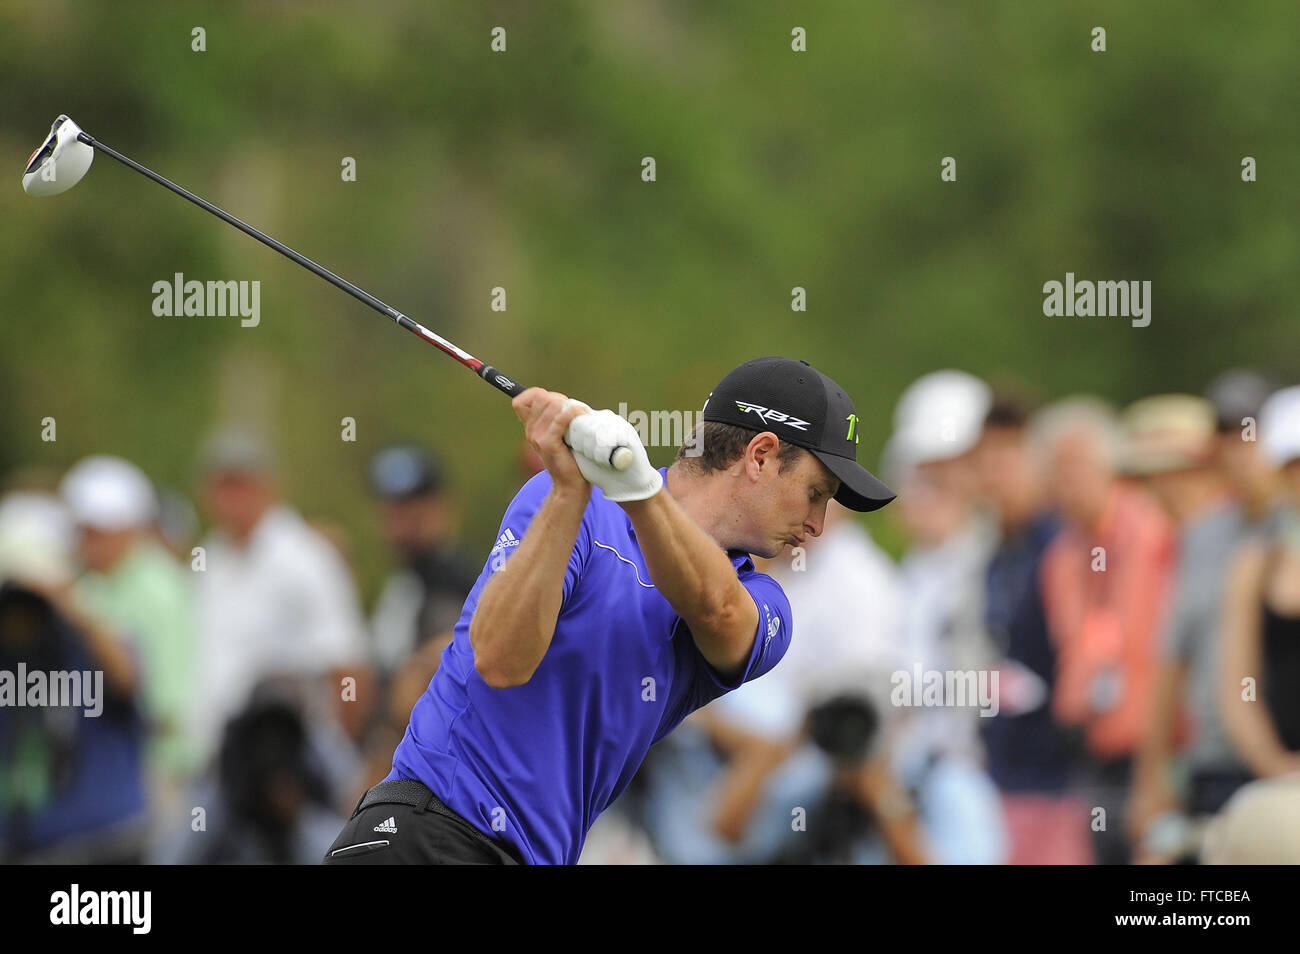 Doral, Fla, USA. 11th Mar, 2012. Justin Rose during the World Golf Championship Cadillac Championship on the TPC Blue Monster Course at Doral Golf Resort And Spa on March 11, 2012 in Doral, Fla. ZUMA PRESS/ Scott A. Miller. © Scott A. Miller/ZUMA Wire/Alamy Live News Stock Photo